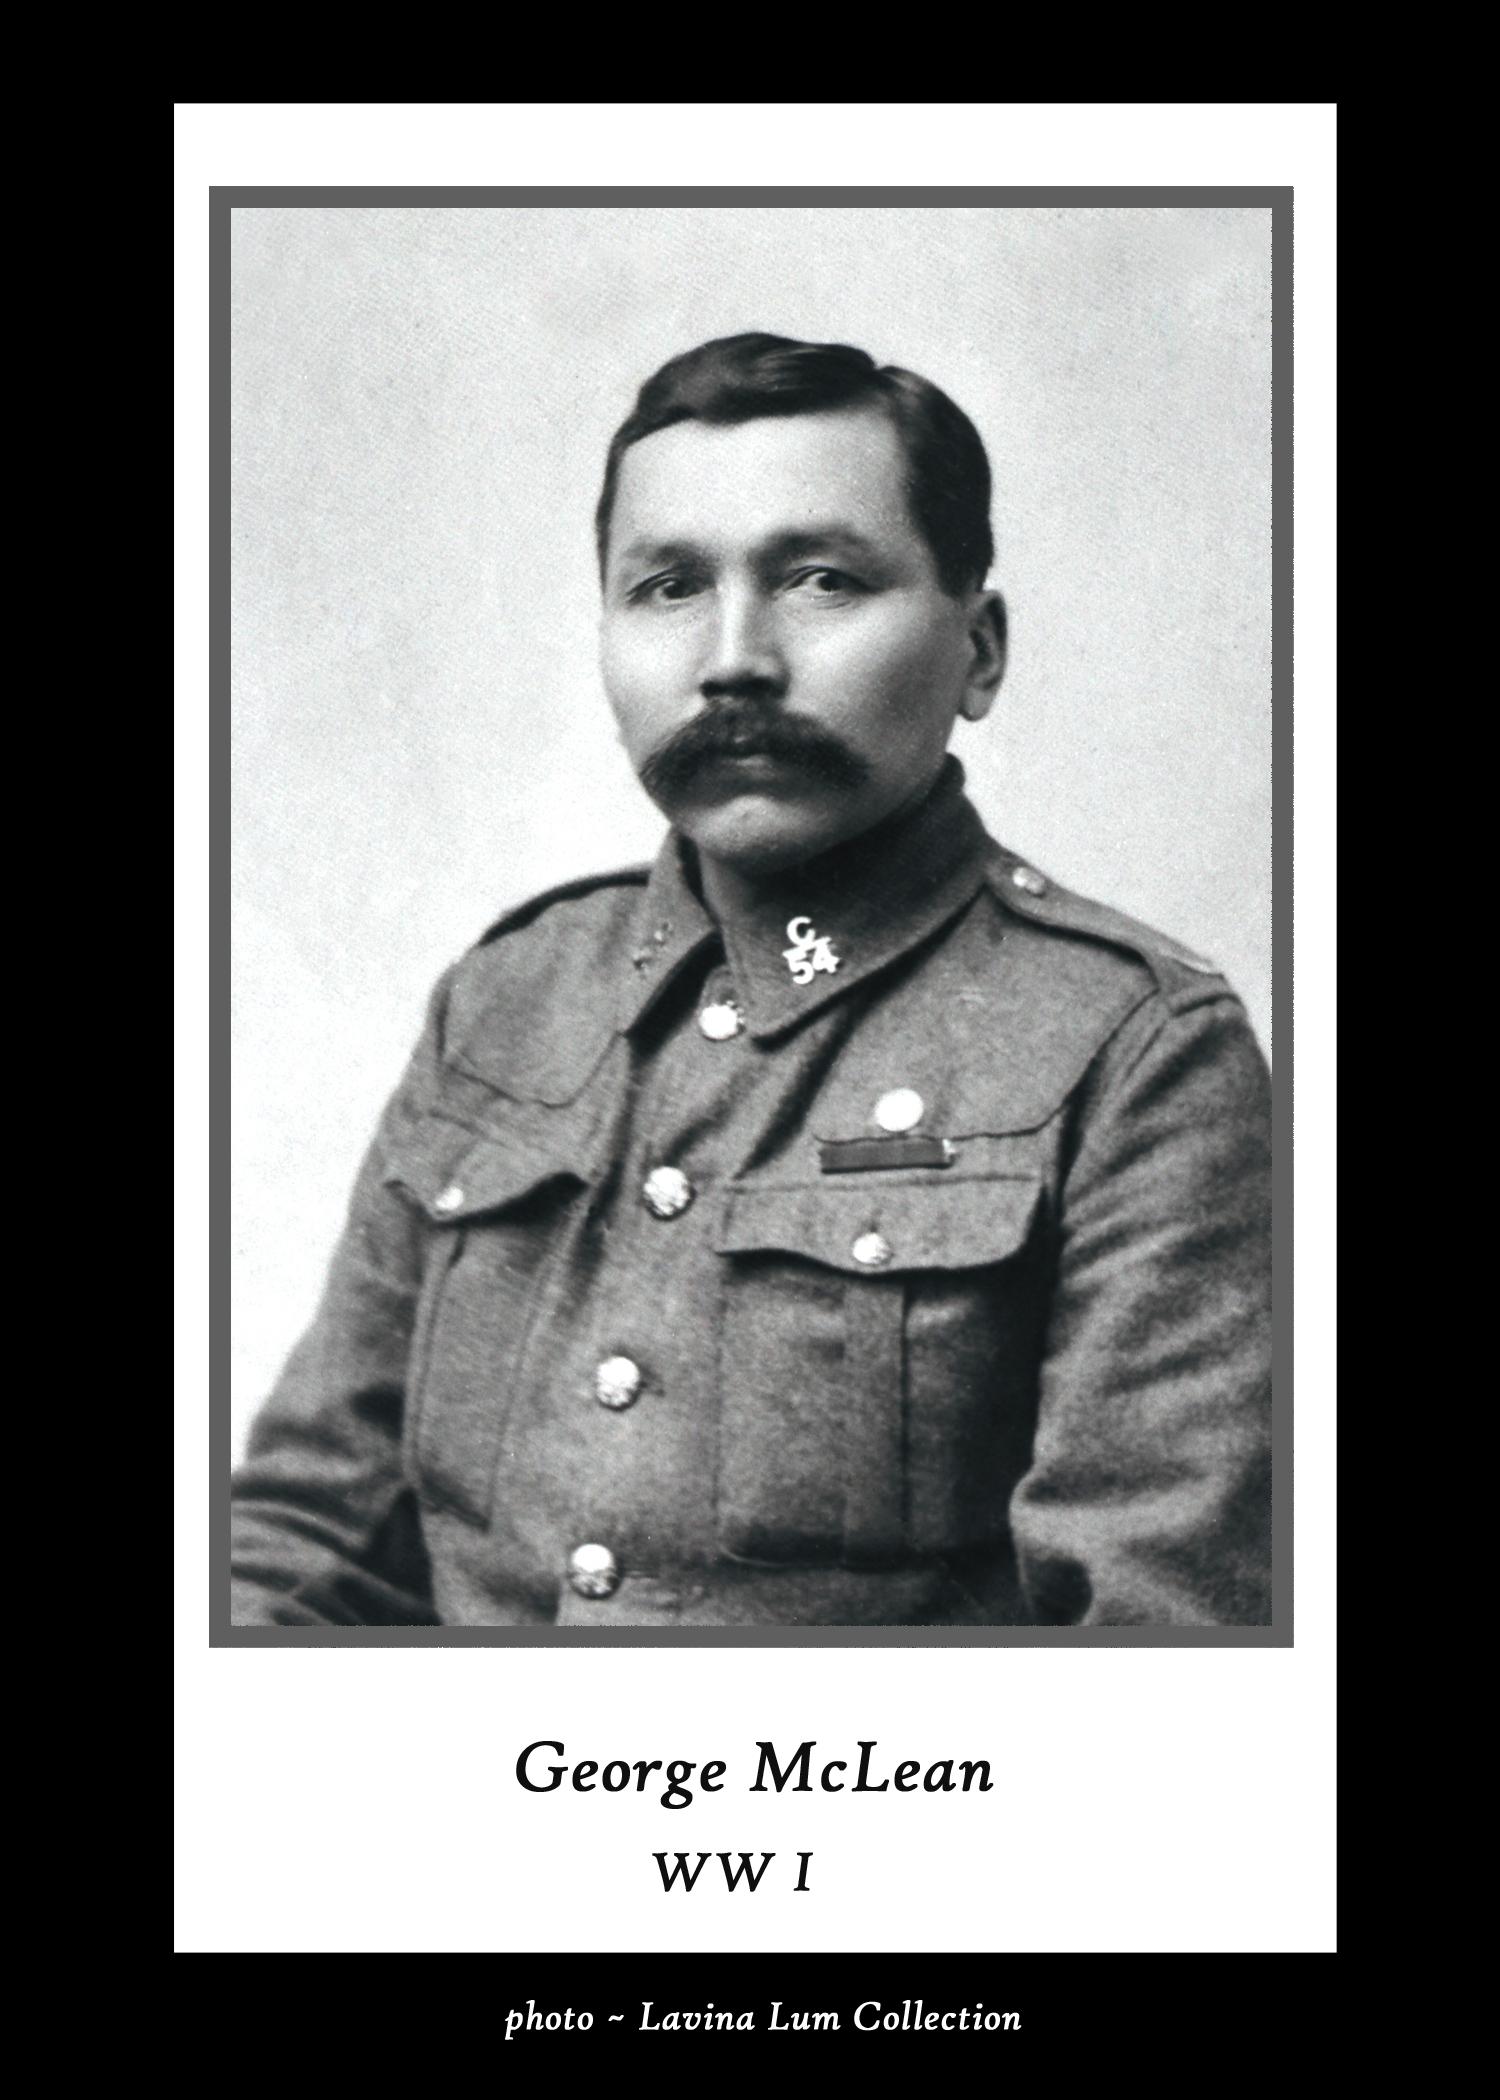 Portrait of Private George McLean in military uniform.